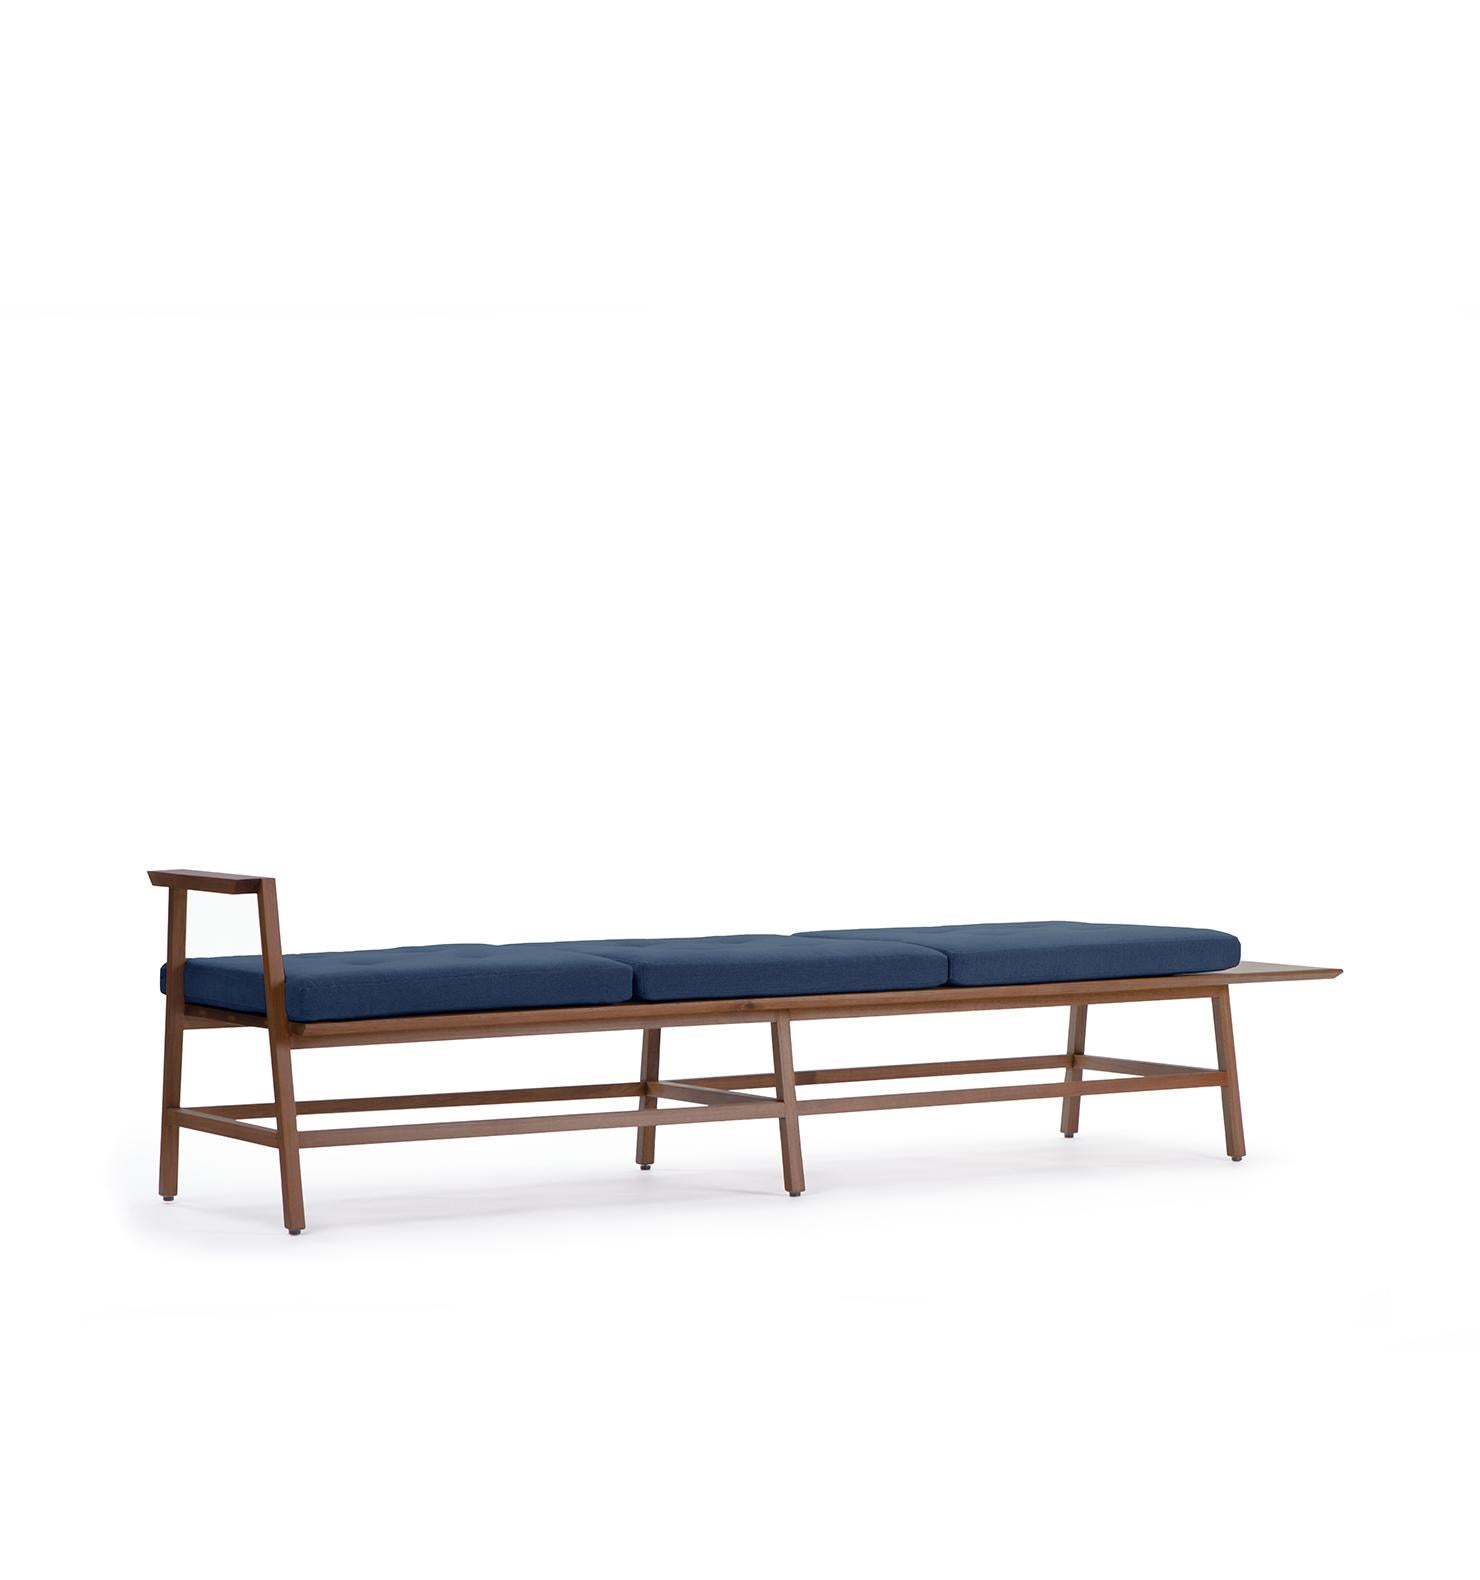 Banca Dedo, Mexican Contemporary 3-Seat Bench by Emiliano Molina for Cuchara For Sale 2